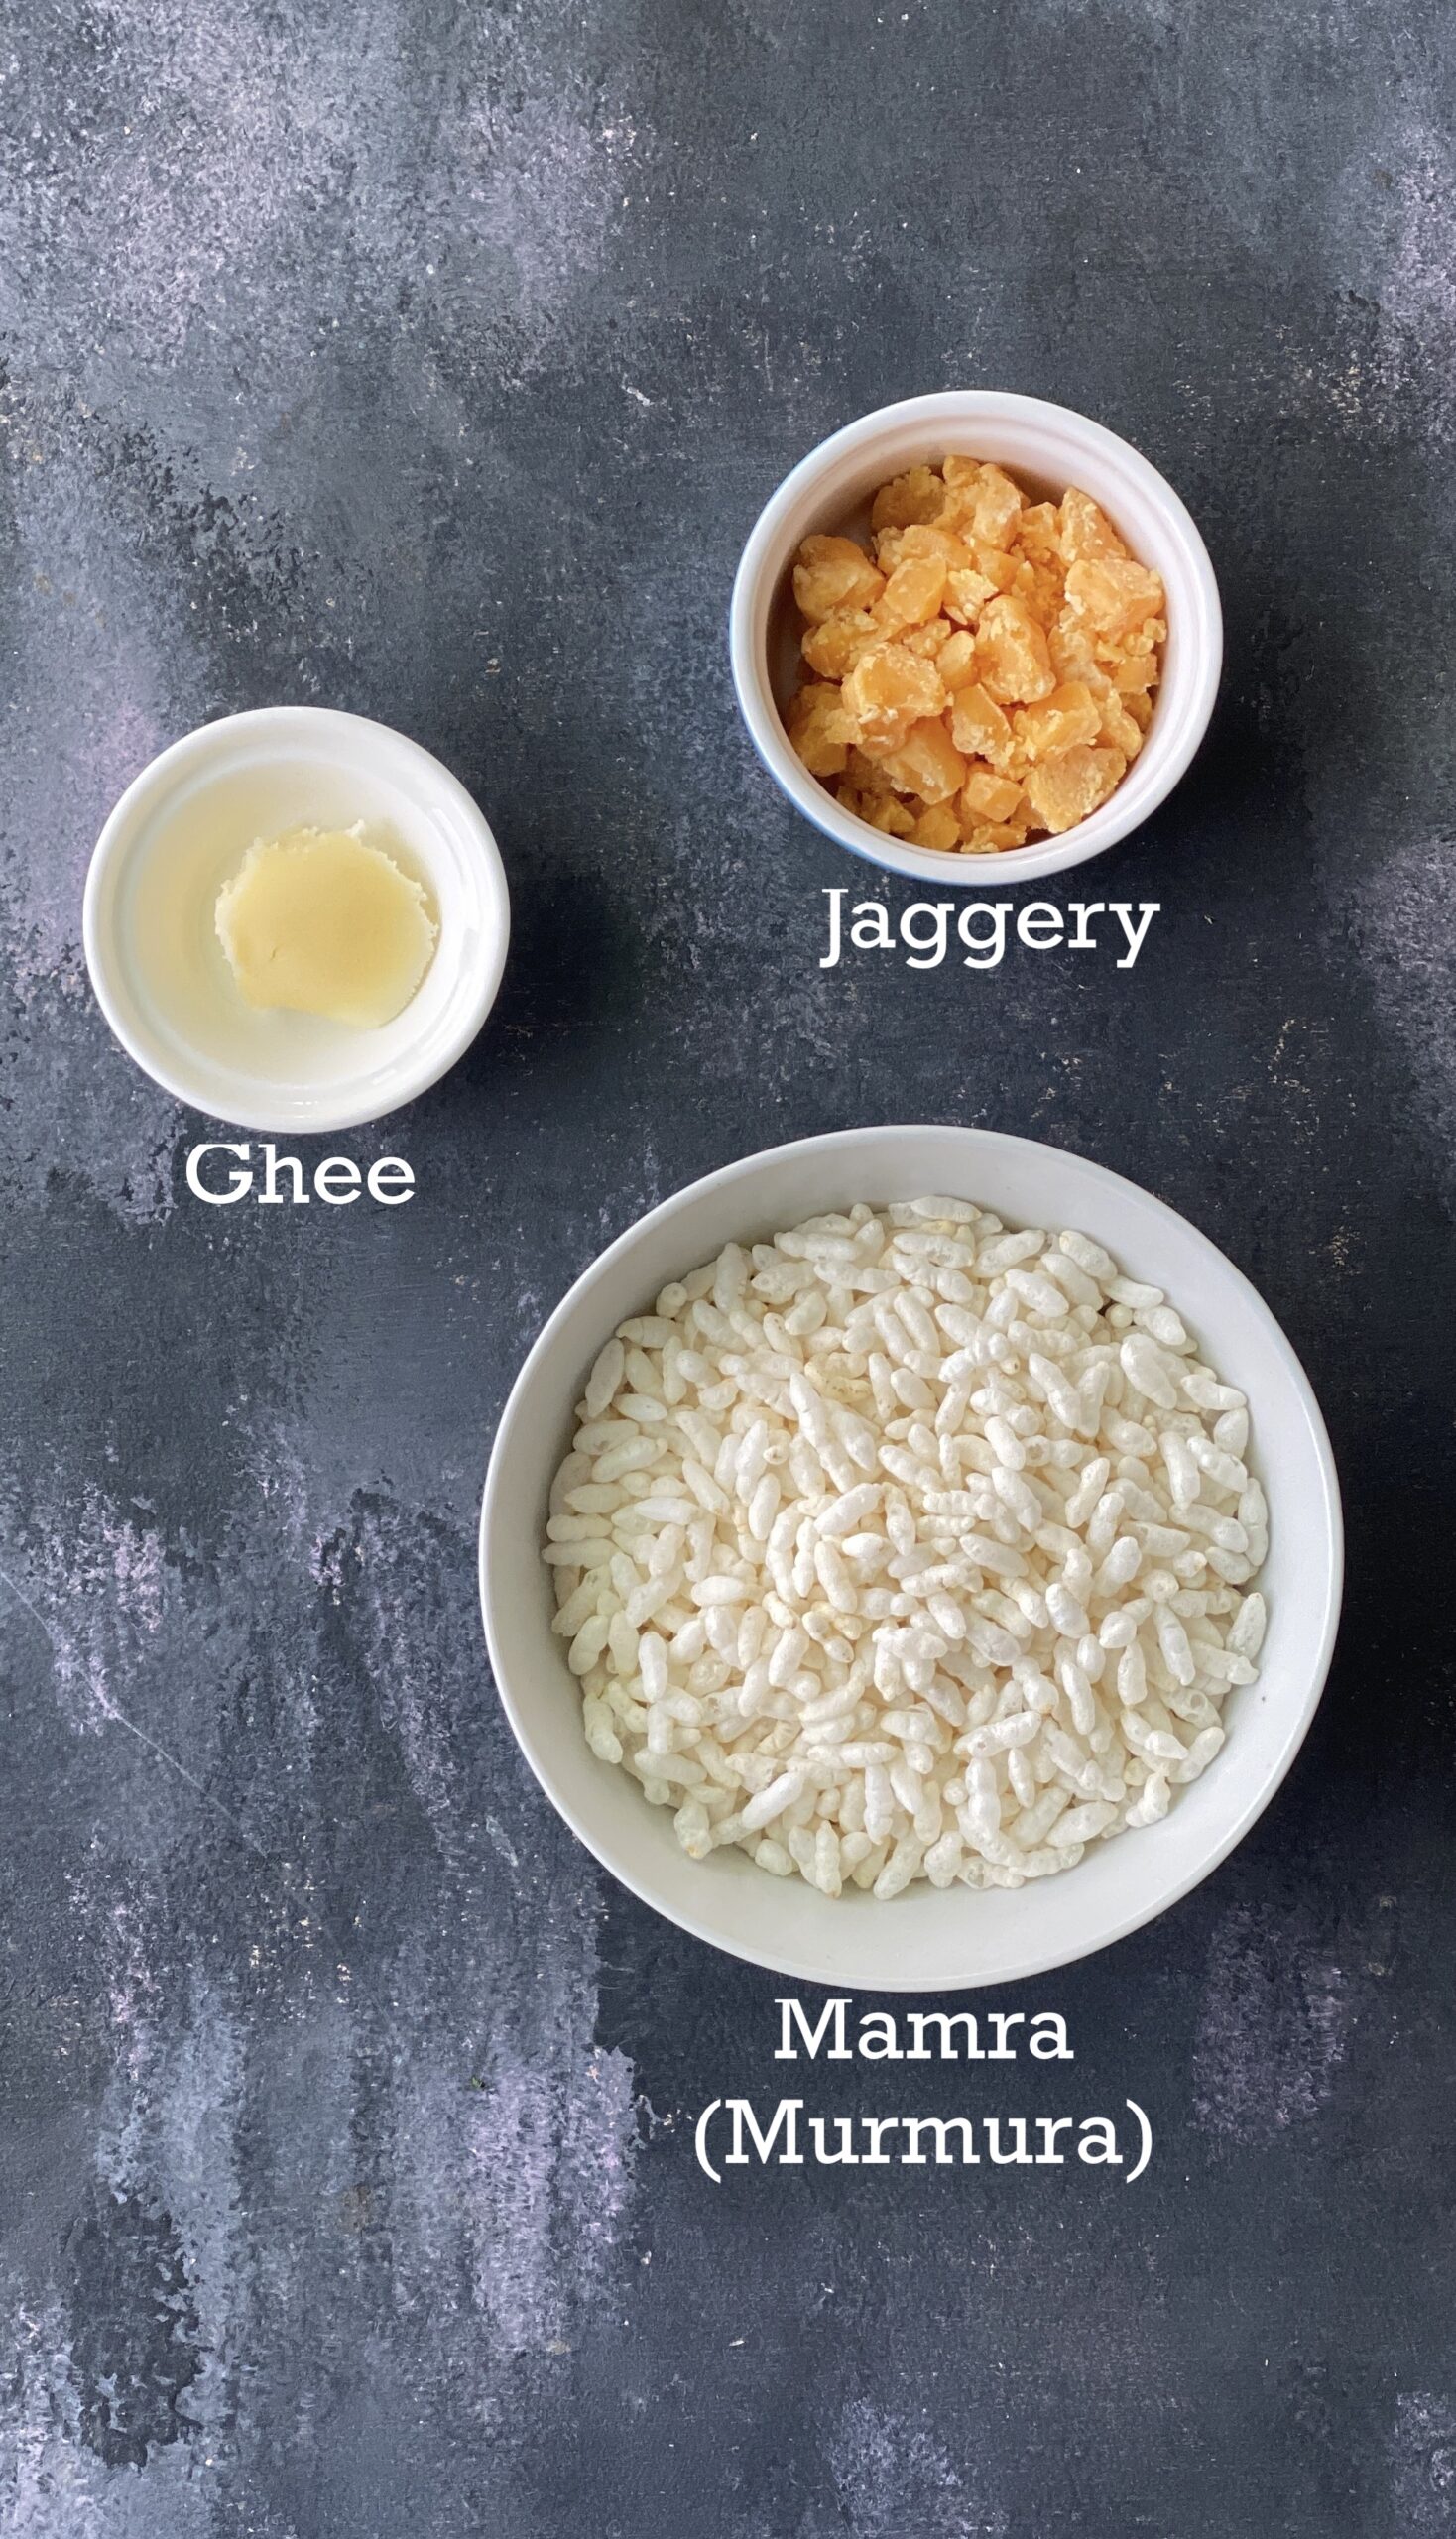 Easy 3 ingredients for mamra chikki; jaggery, mamra and ghee.